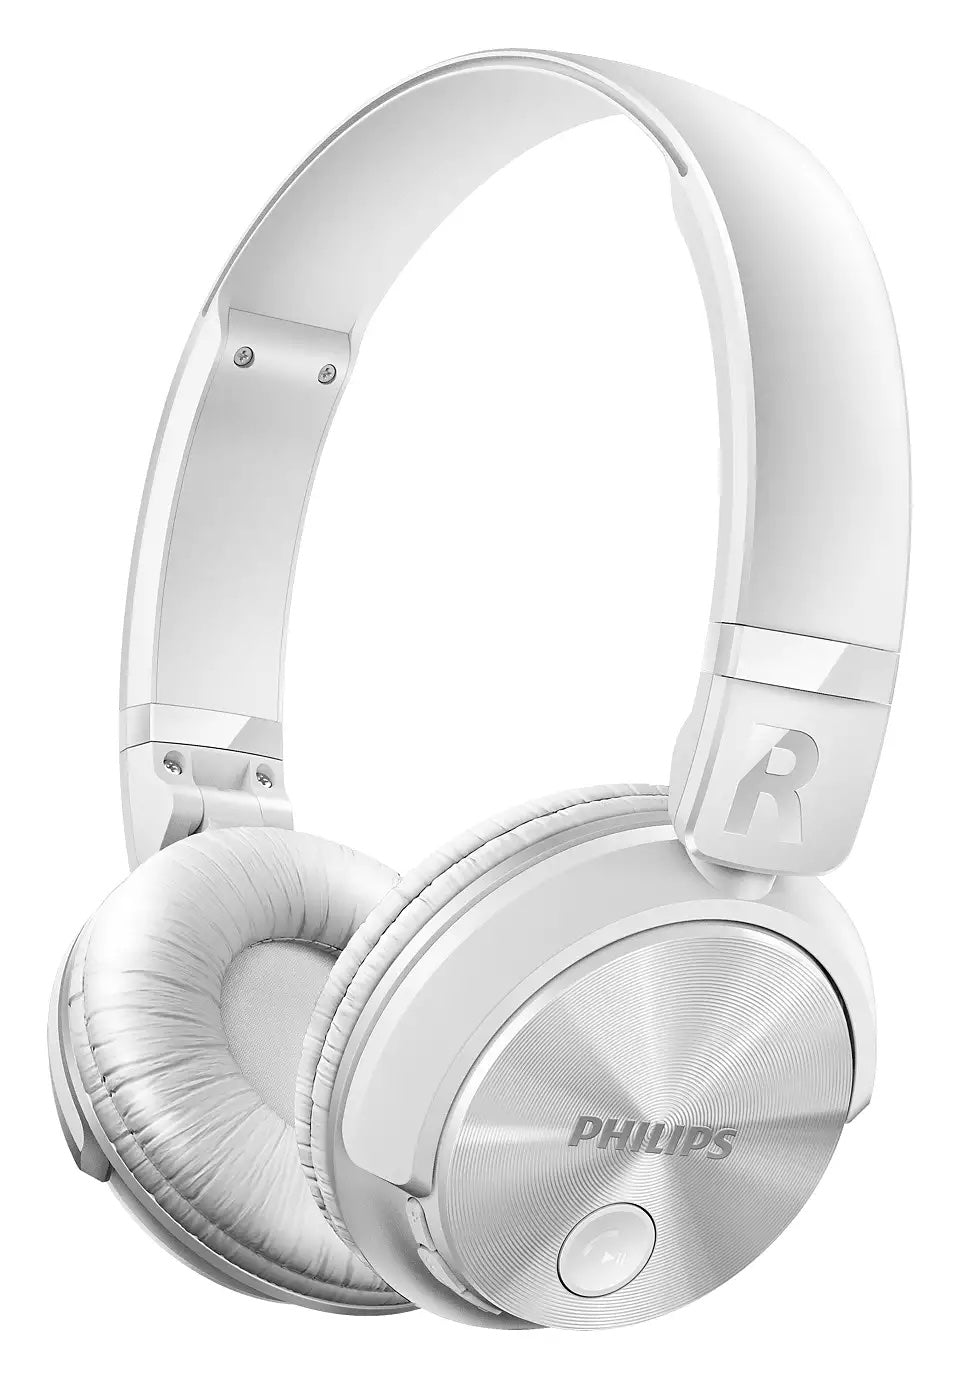 philips-bluetooth-stereo-wireless-over-ear-headset-white-2